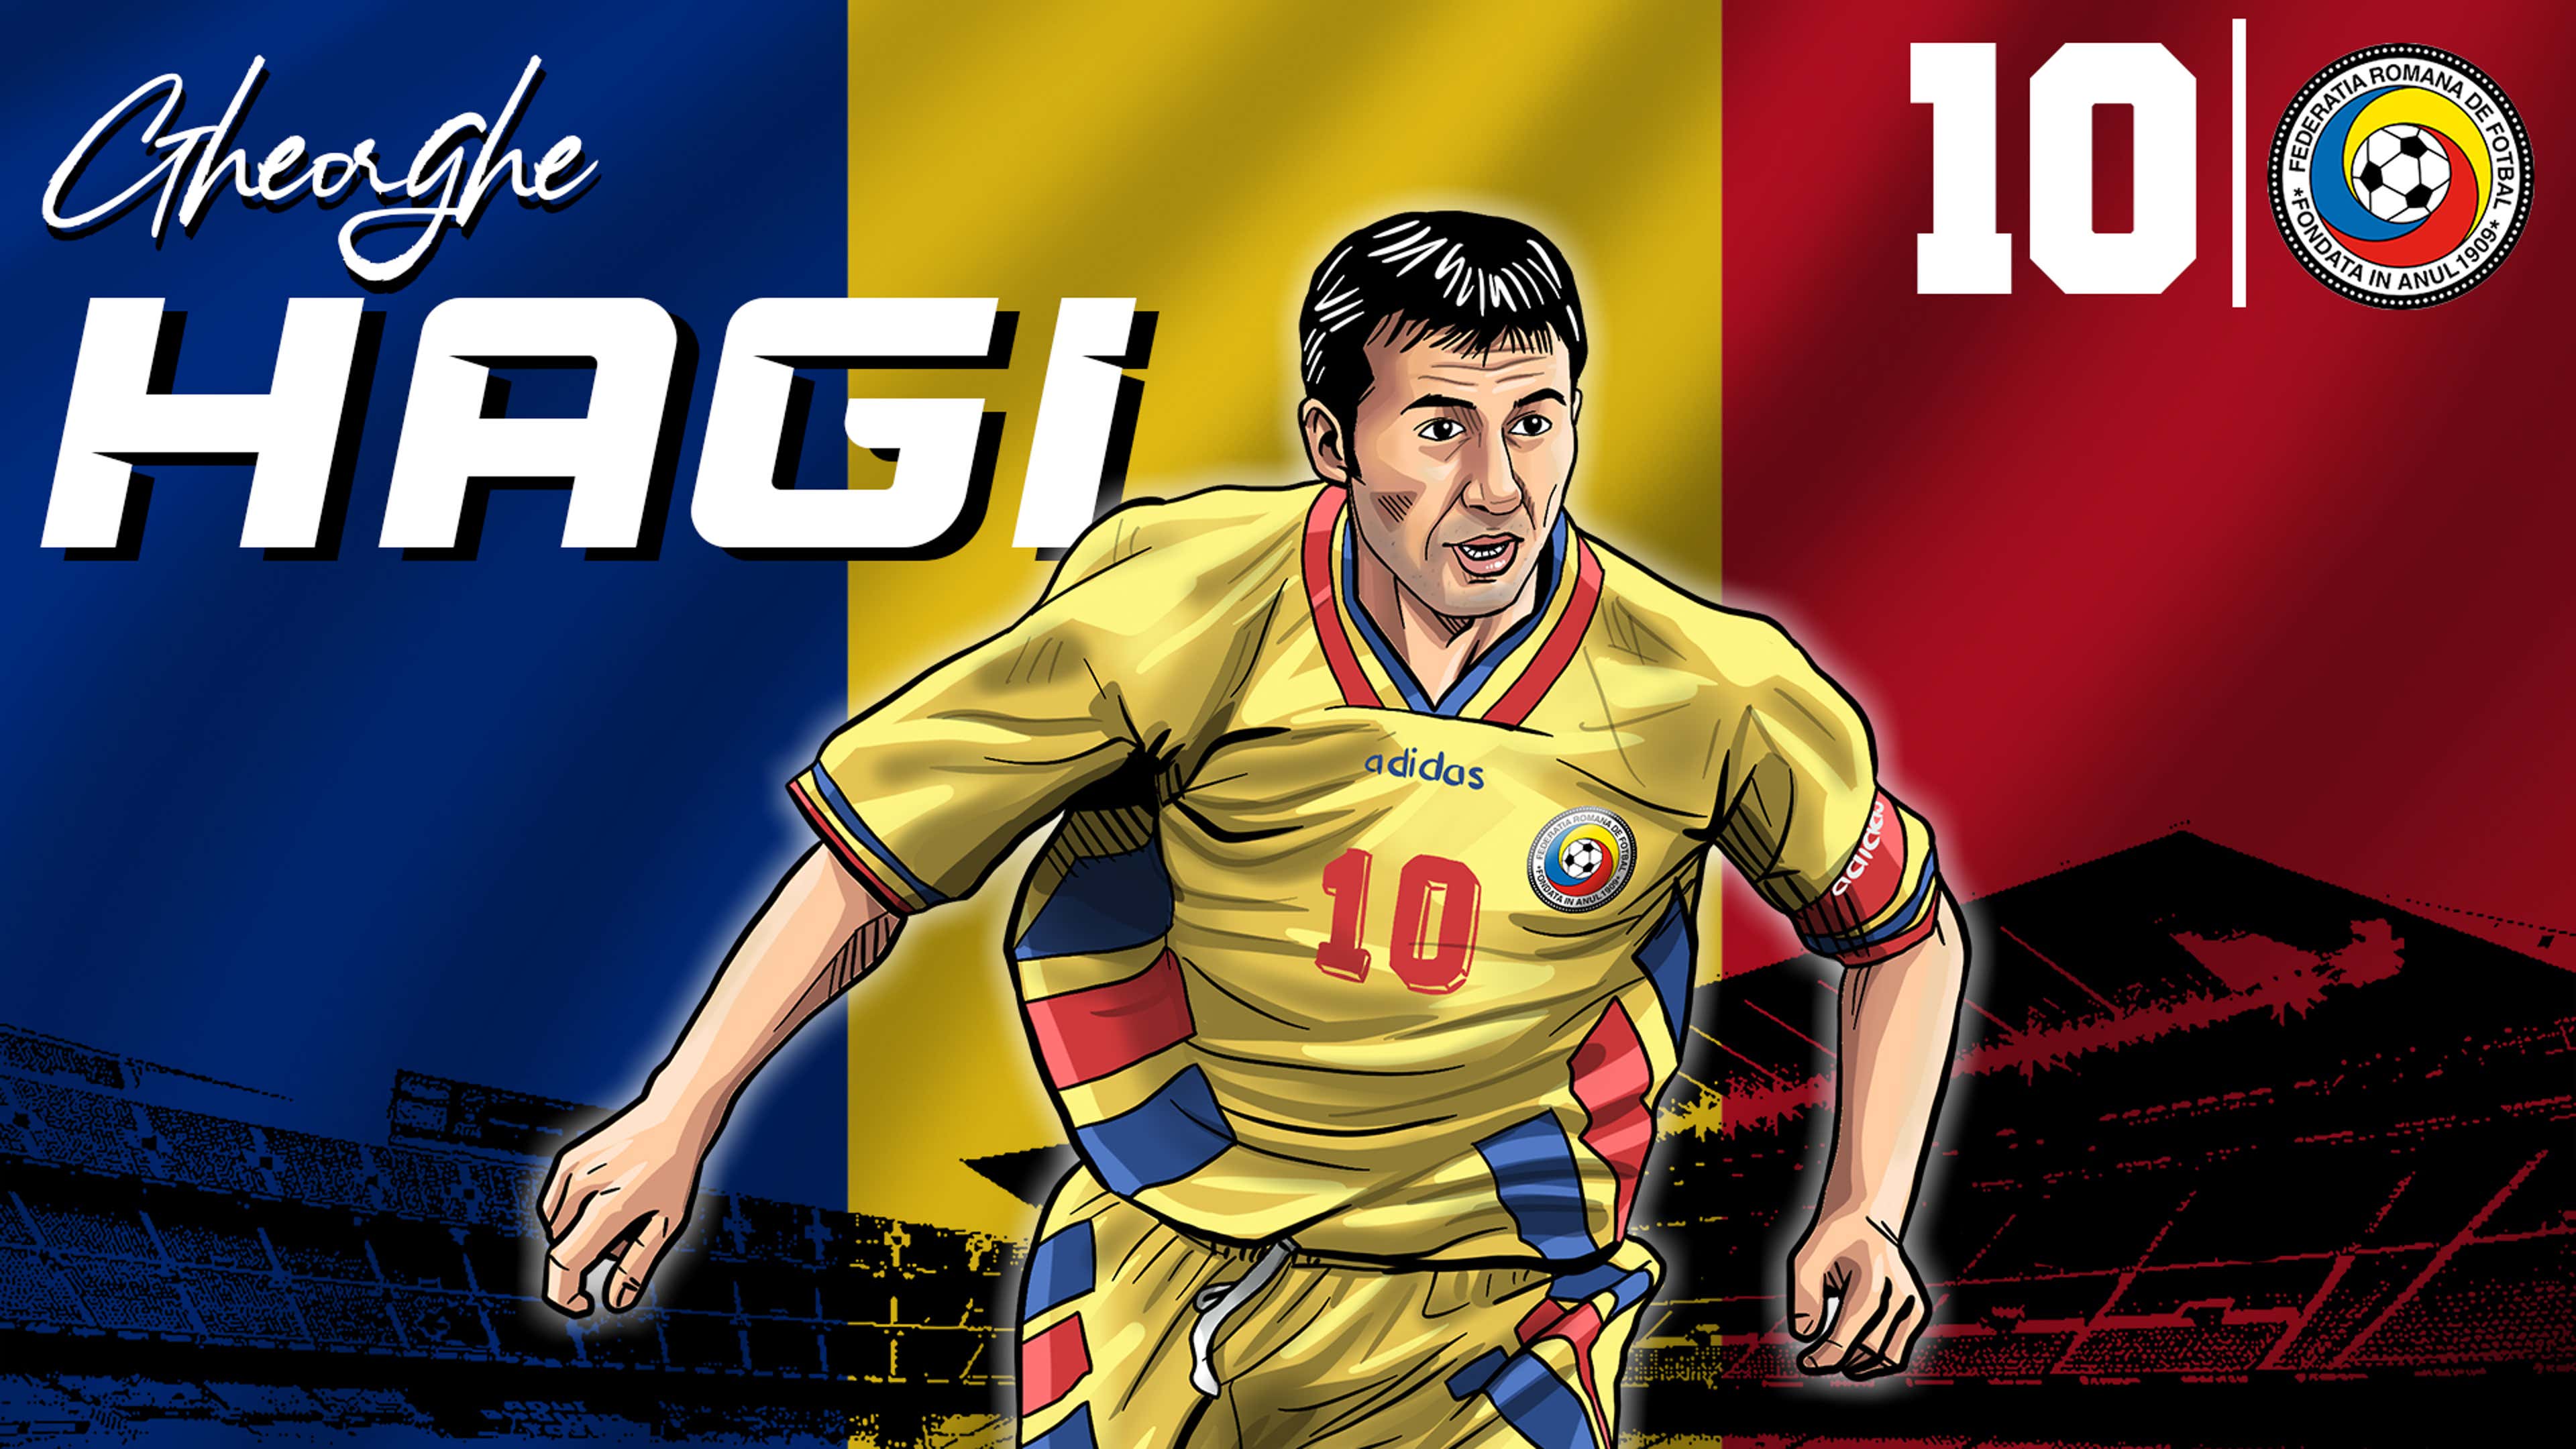 How Gheorghe Hagi went from Real Madrid to Barcelona  via Serie